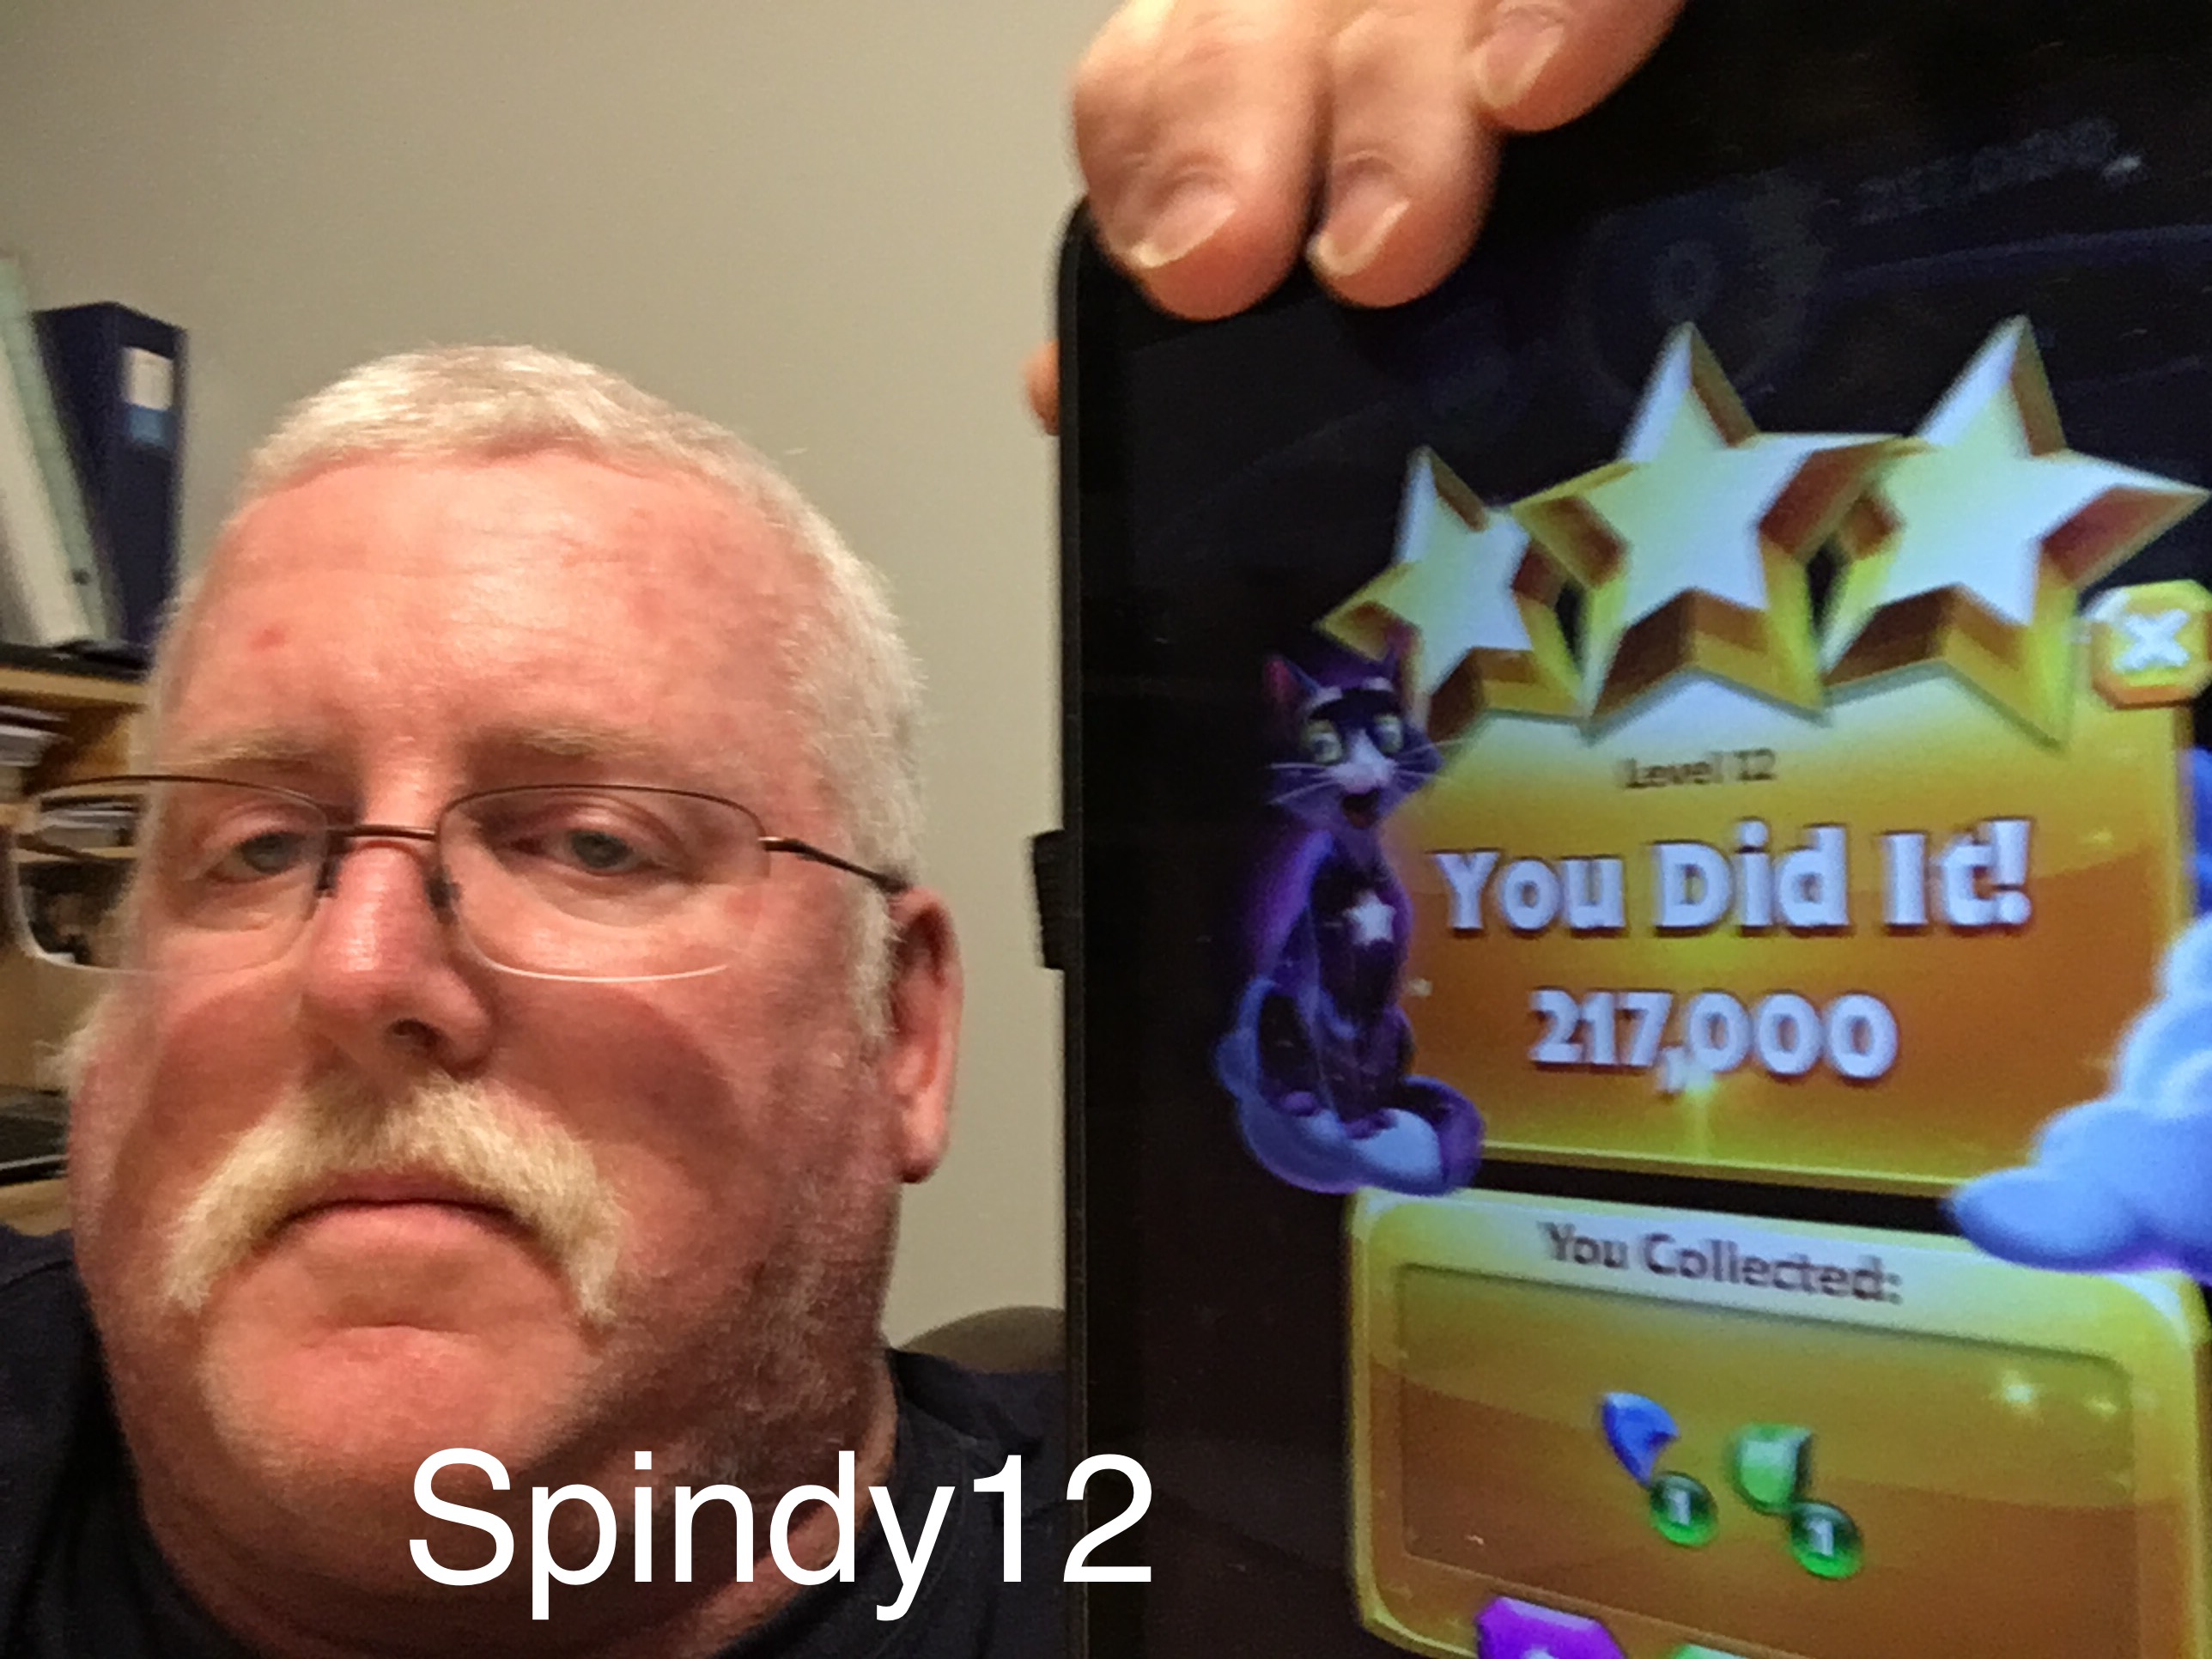 Spindy12: Bejeweled Stars: Level 12 - Double Trouble (iOS) 217,000 points on 2016-12-25 07:45:54